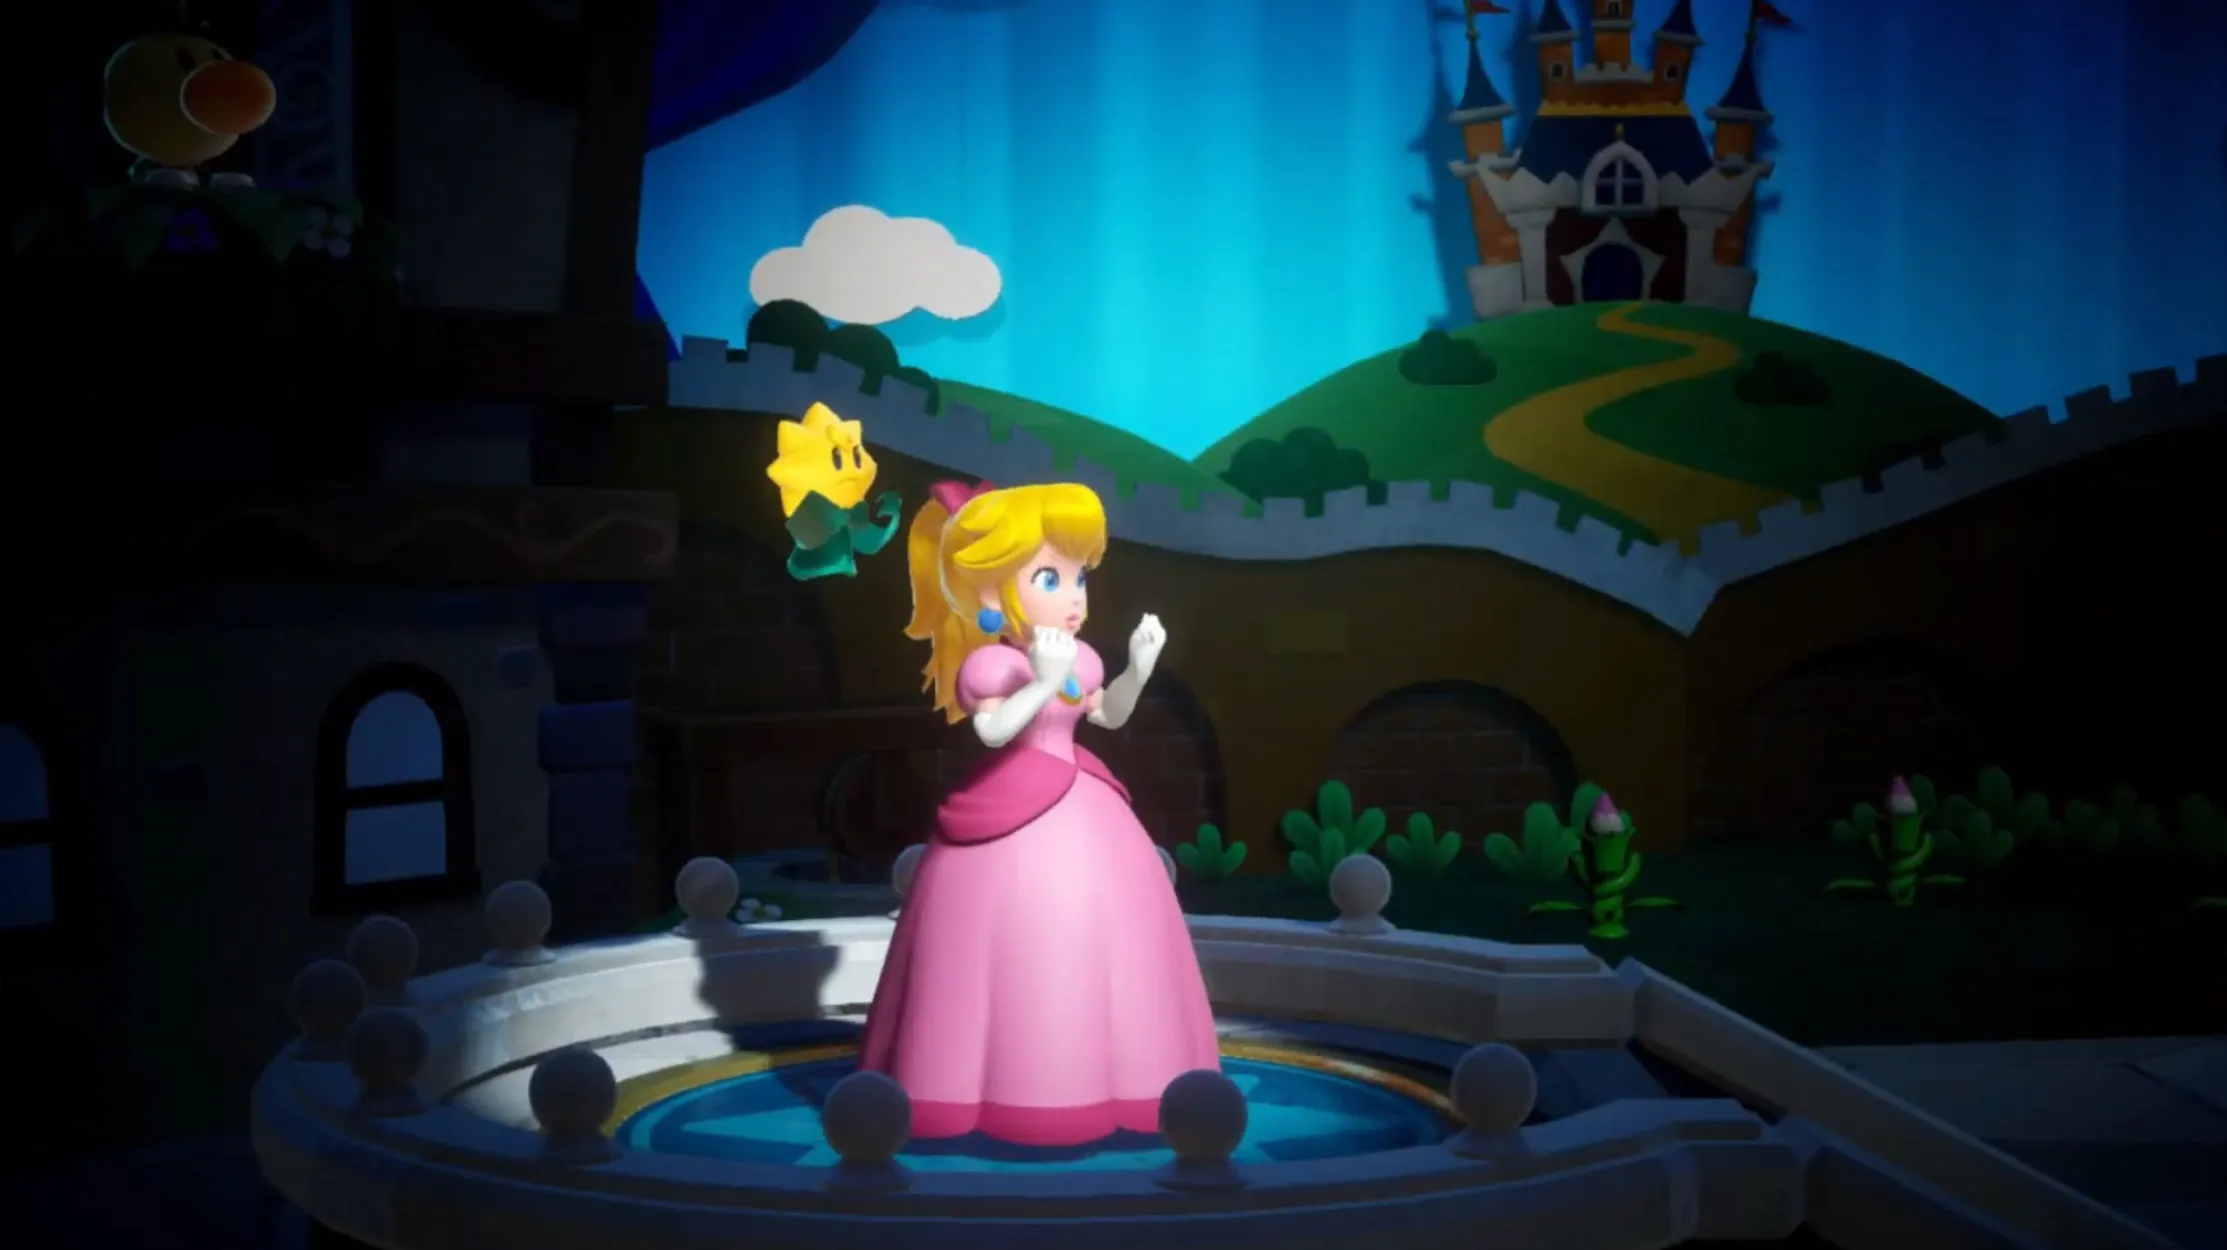 All Princess Peach outfits from Mario games, ranked by how hard they slay